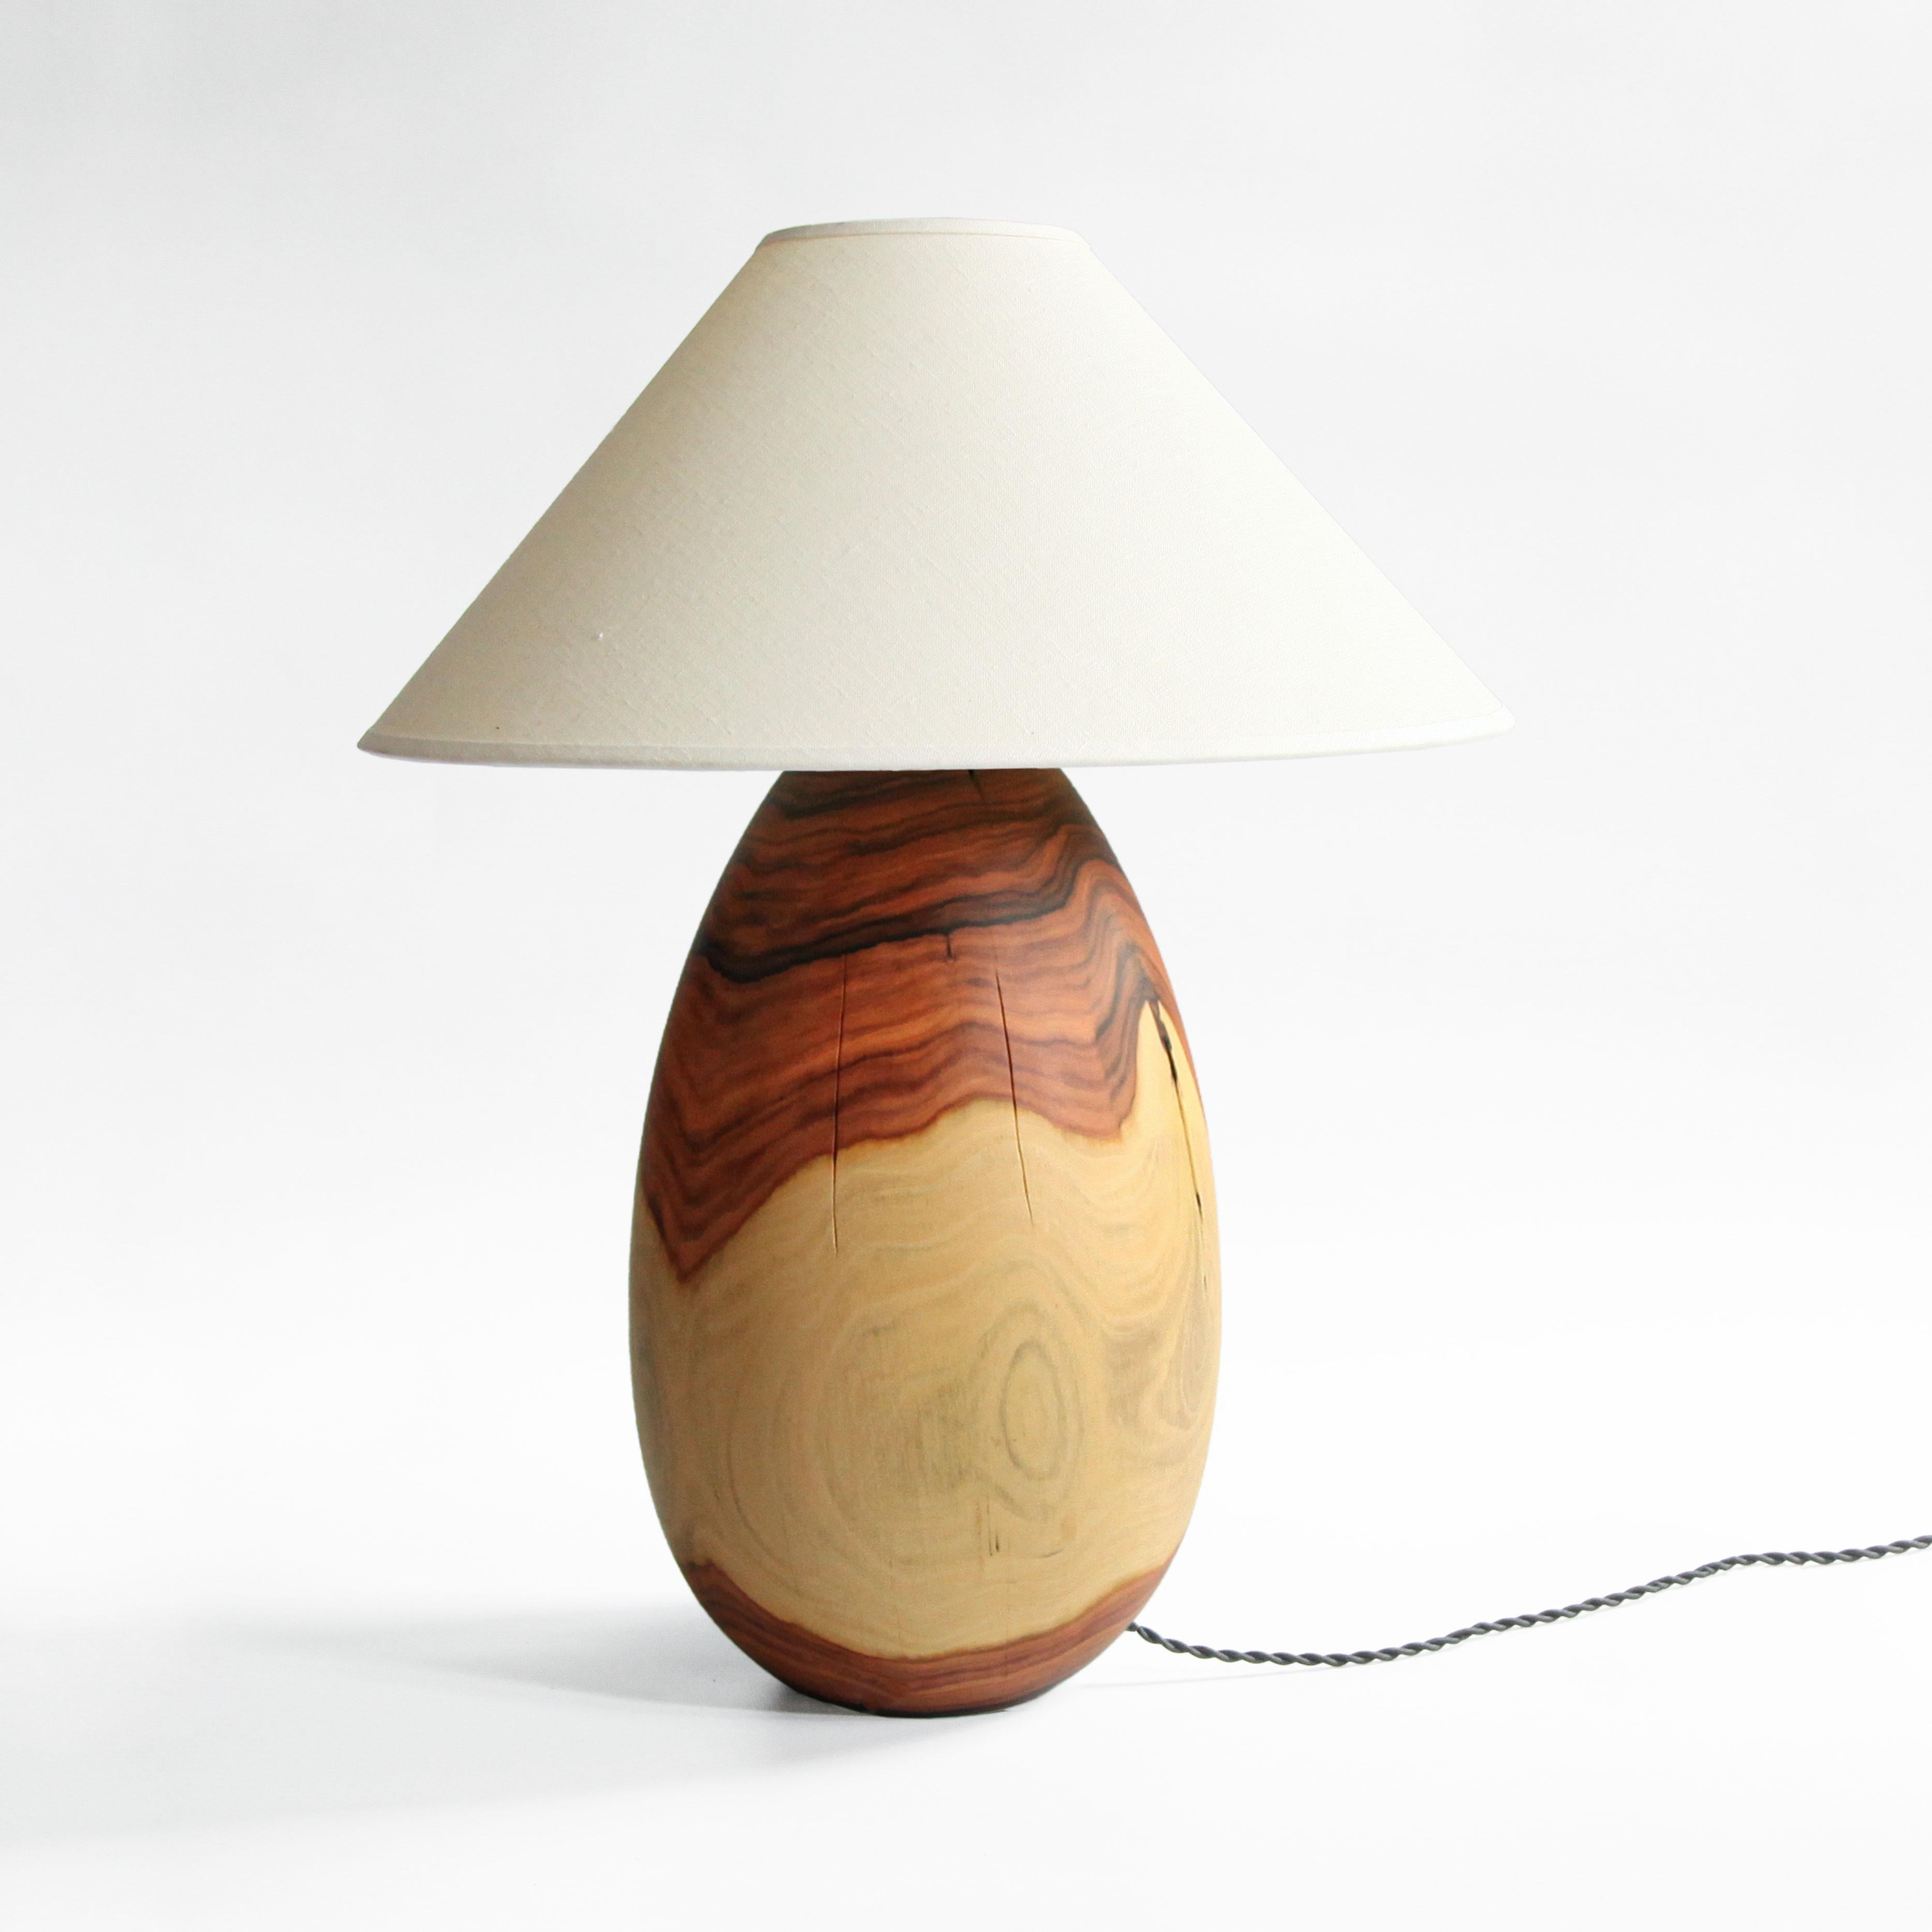 The Árbol collection is an embrace of tropical modernism; each lamp is composed of salvaged tropical hardwoods from the Bolivian city of Santa Cruz, where trees that are felled by natural causes-or for construction-are rescued by our team. A blend